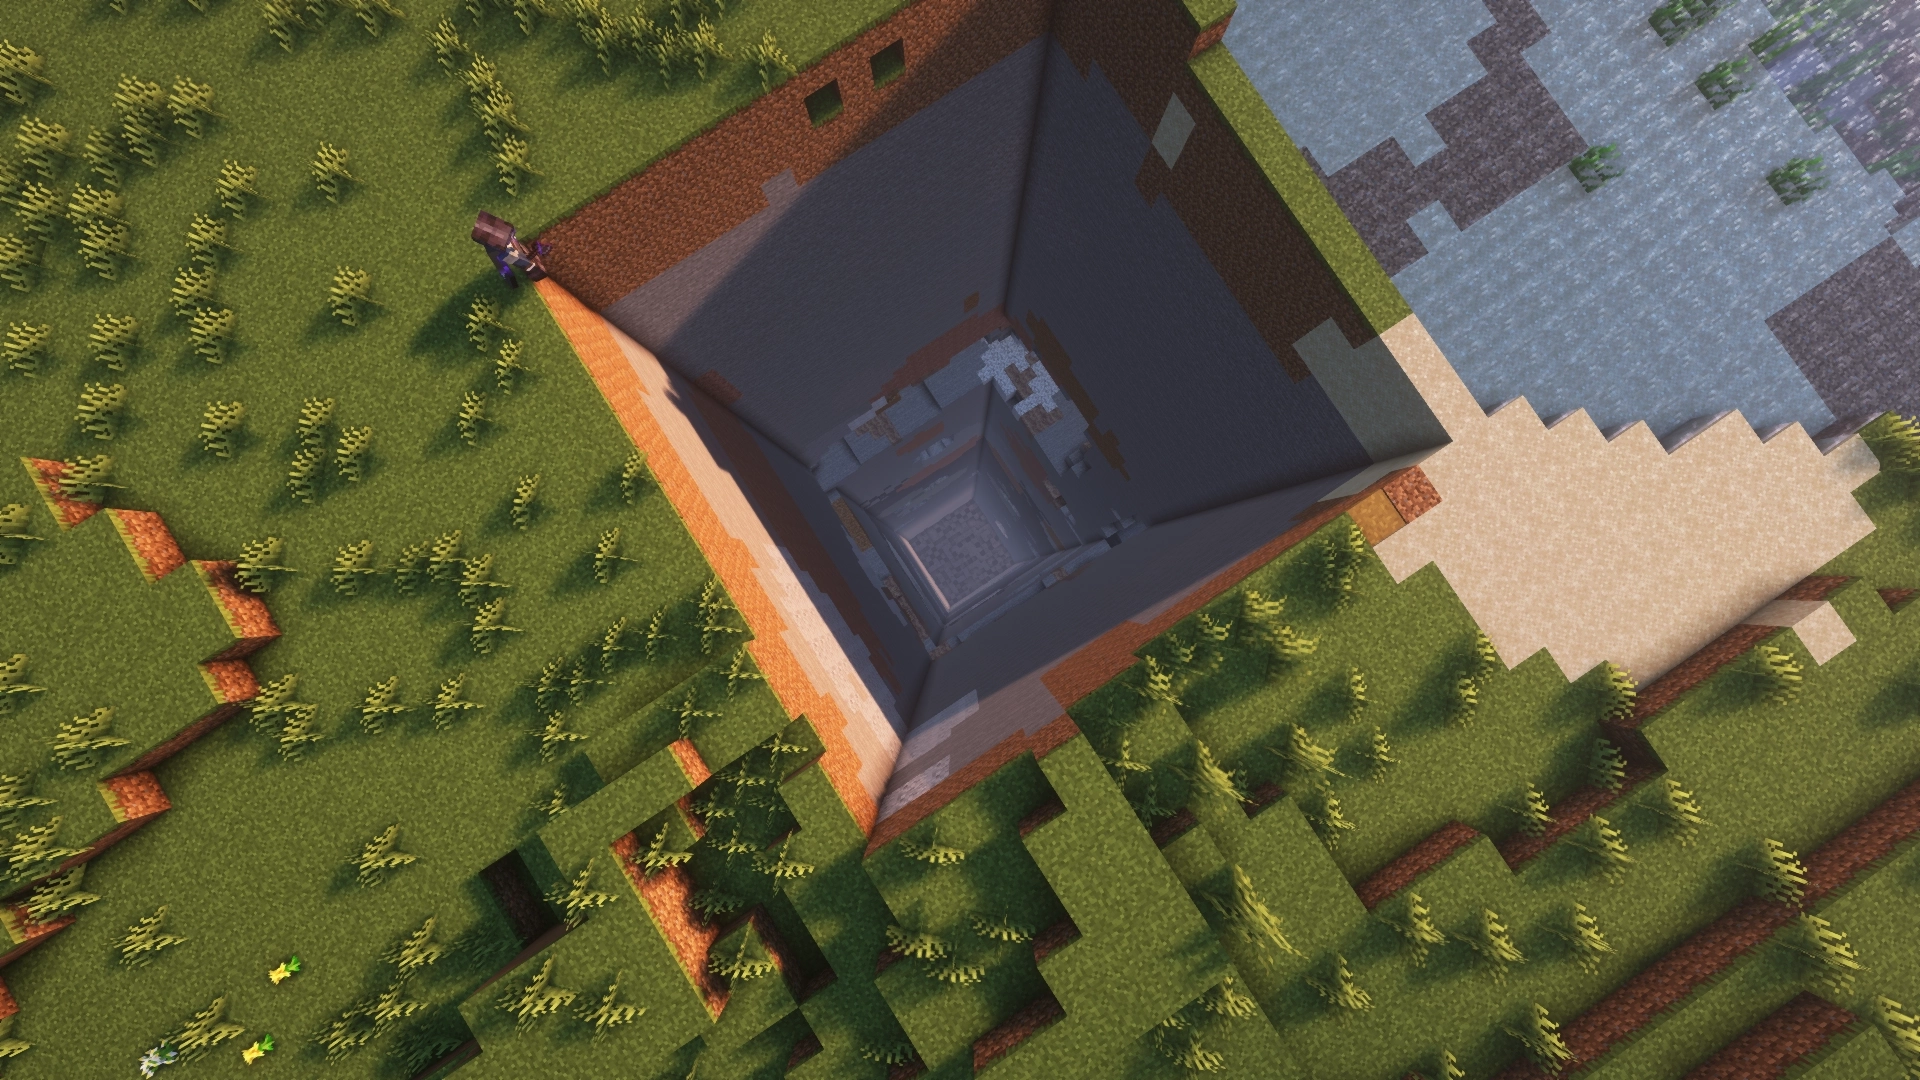 A top down shot of my Minecraft character standing next to a one chunk big hole straight down to bedrock